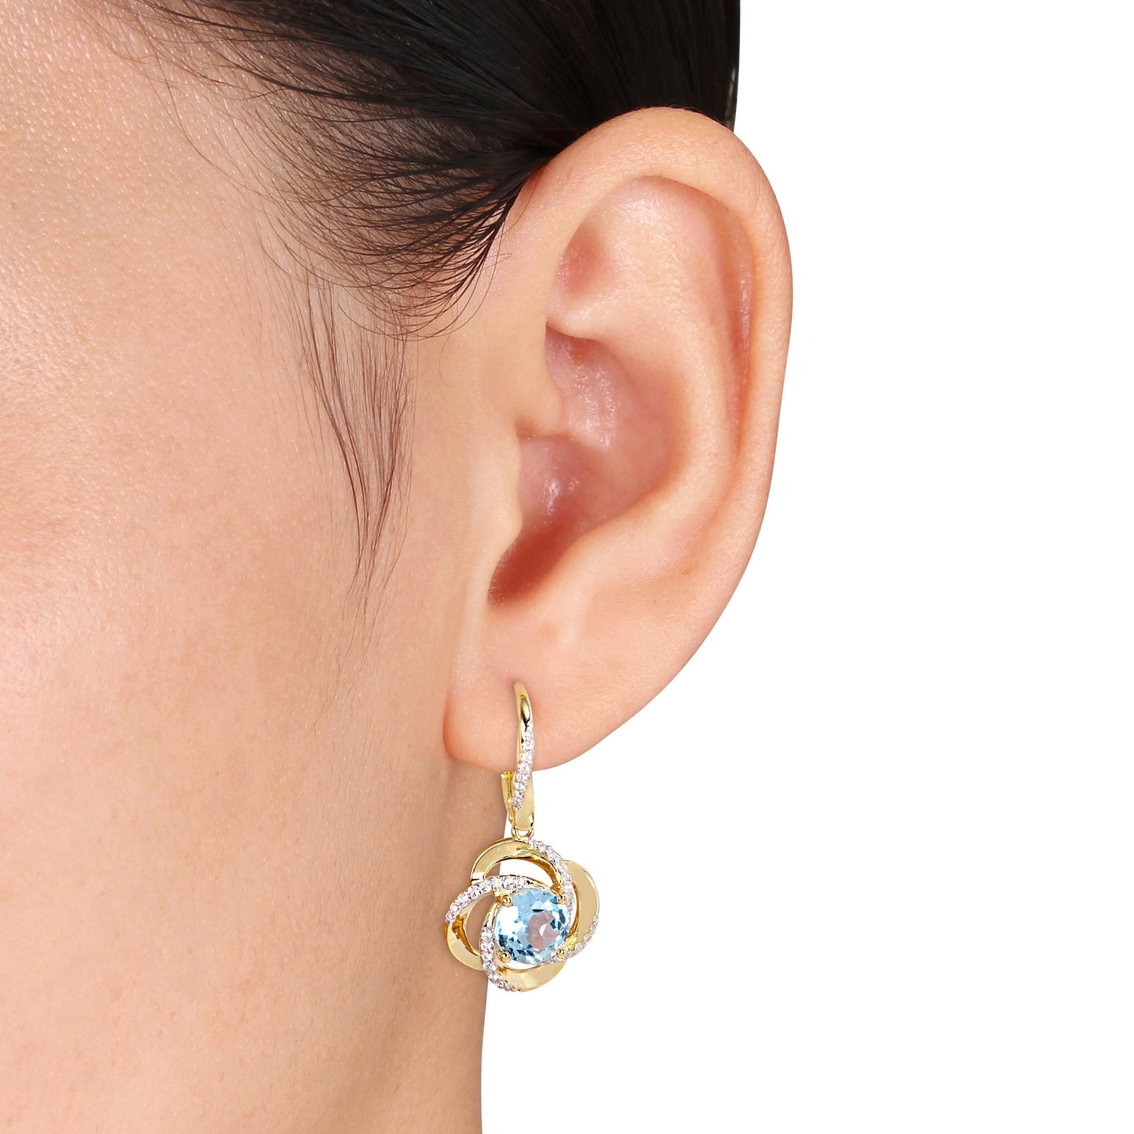 Sofia B. Blue & White Topaz Love Knot Swirl Earrings Yellow Plated Sterling Silver - Image 2 of 2